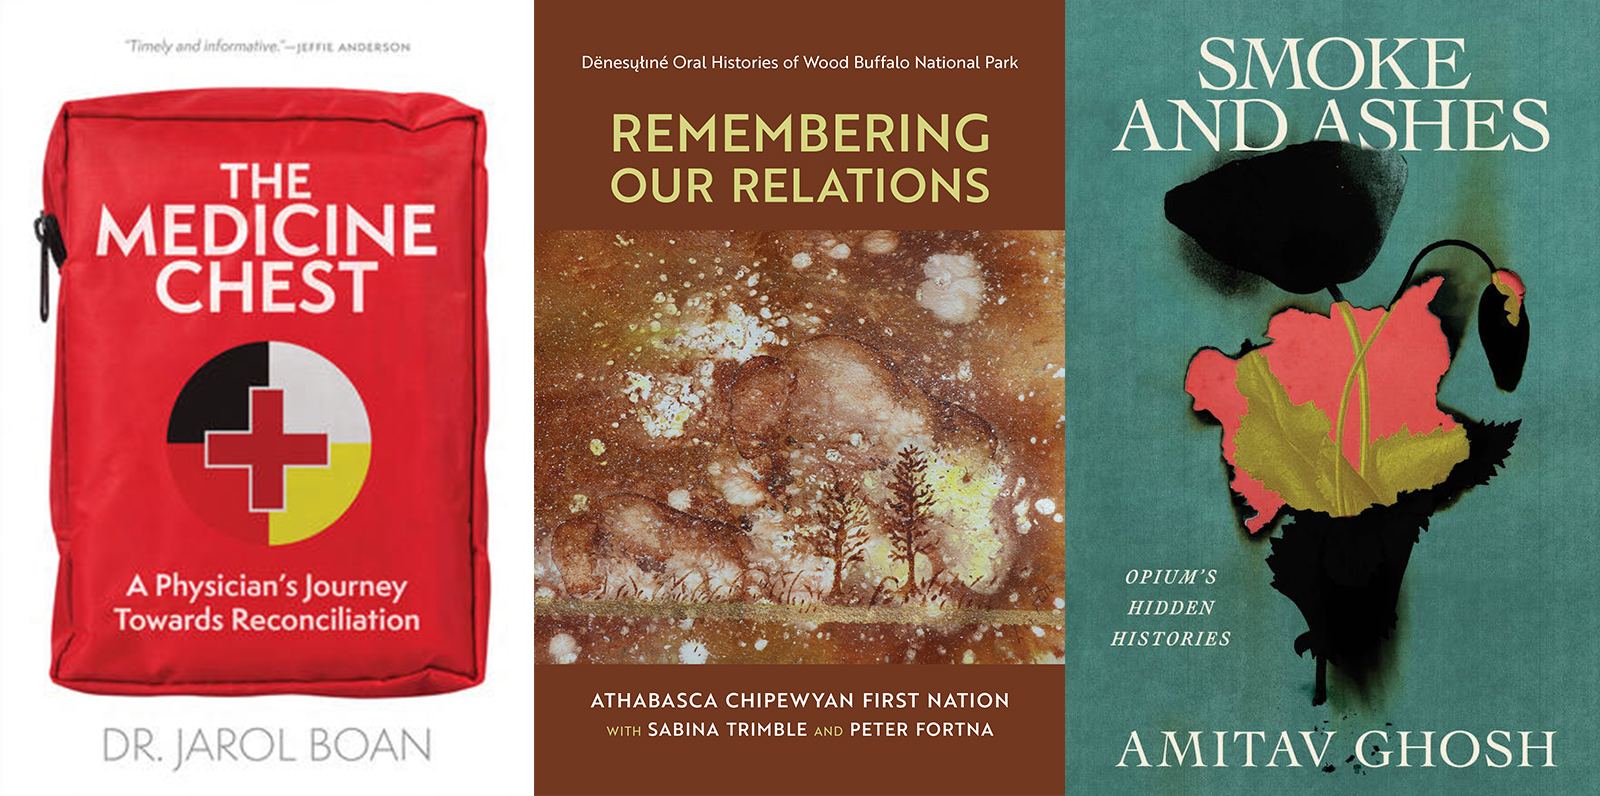 Three book covers, from left: 'The Medicine Chest' by Dr. Jarol Boan; 'Remembering Our Relations' by Athabasca Chipewyan First Nation with Sabina Trimble and Peter Fortna; 'Smoke and Ashes' by Amitav Ghosh.